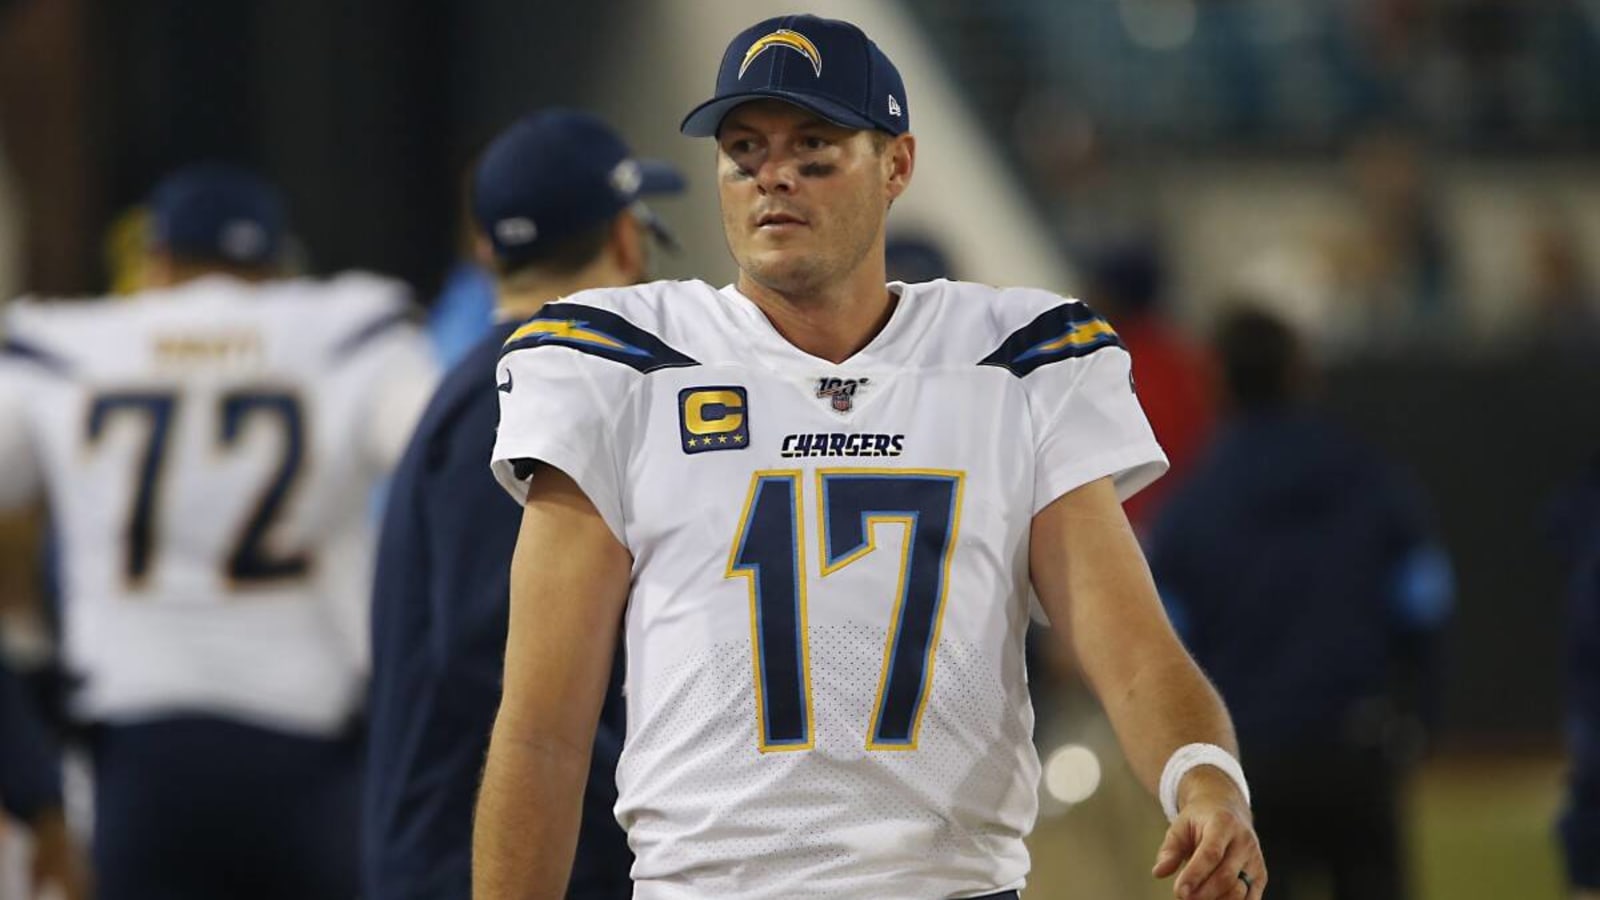 Chargers Low NFLPA Survery Grade Resulted in Hilarious Philip Rivers Jokes